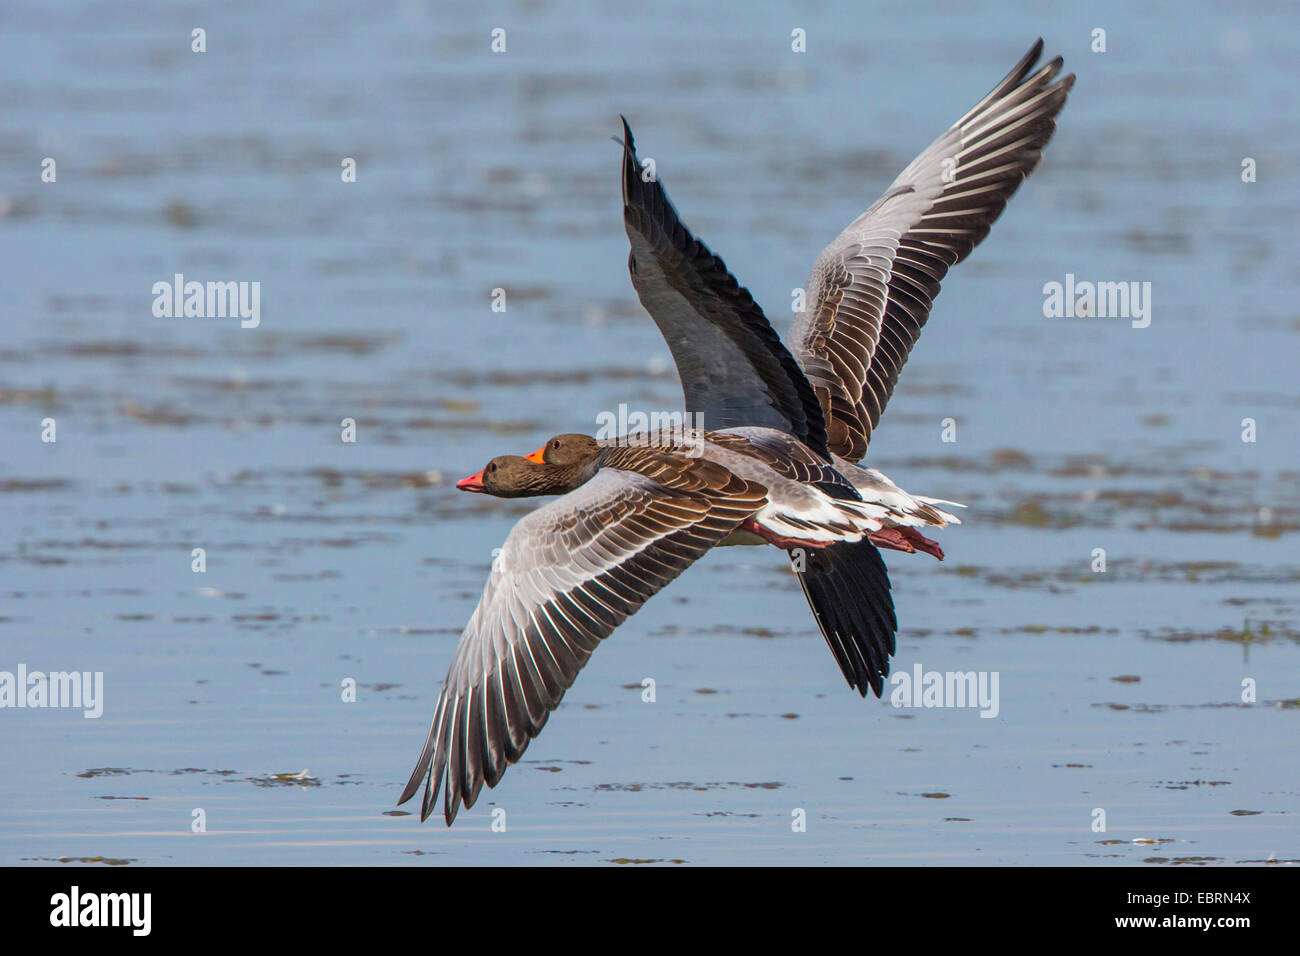 greylag goose (Anser anser), two geese in flight, Germany, Bavaria, Lake Chiemsee Stock Photo